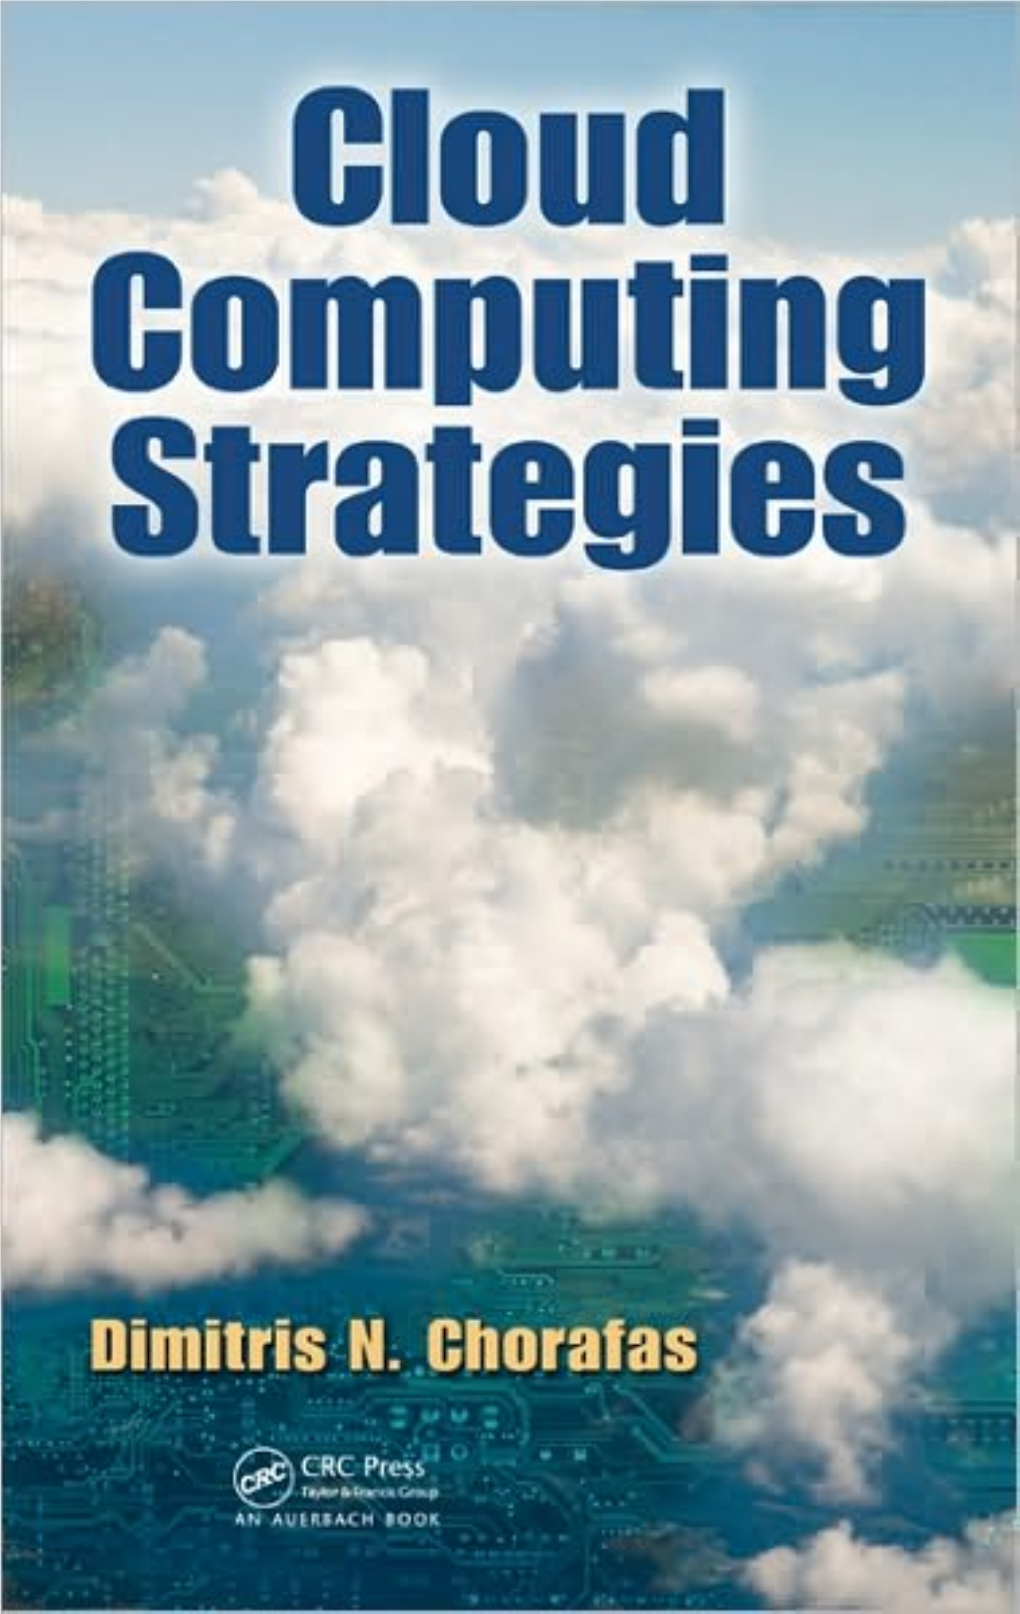 Cloud Computing Strategies IT Management TITLES from Auerbach Publications and CRC PRESS